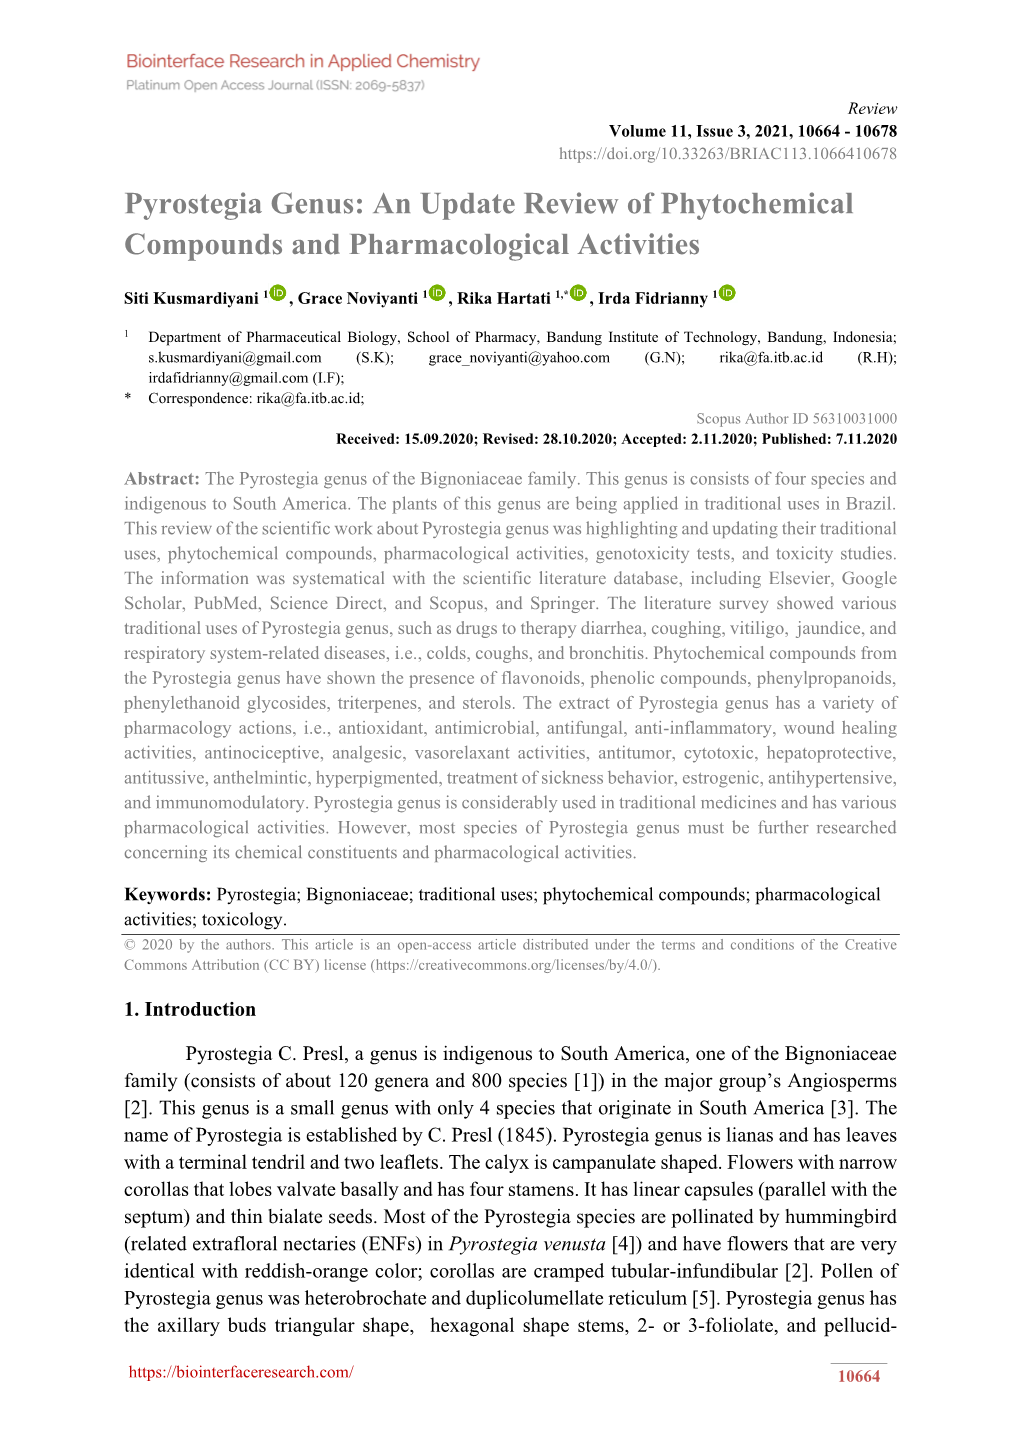 Pyrostegia Genus: an Update Review of Phytochemical Compounds and Pharmacological Activities